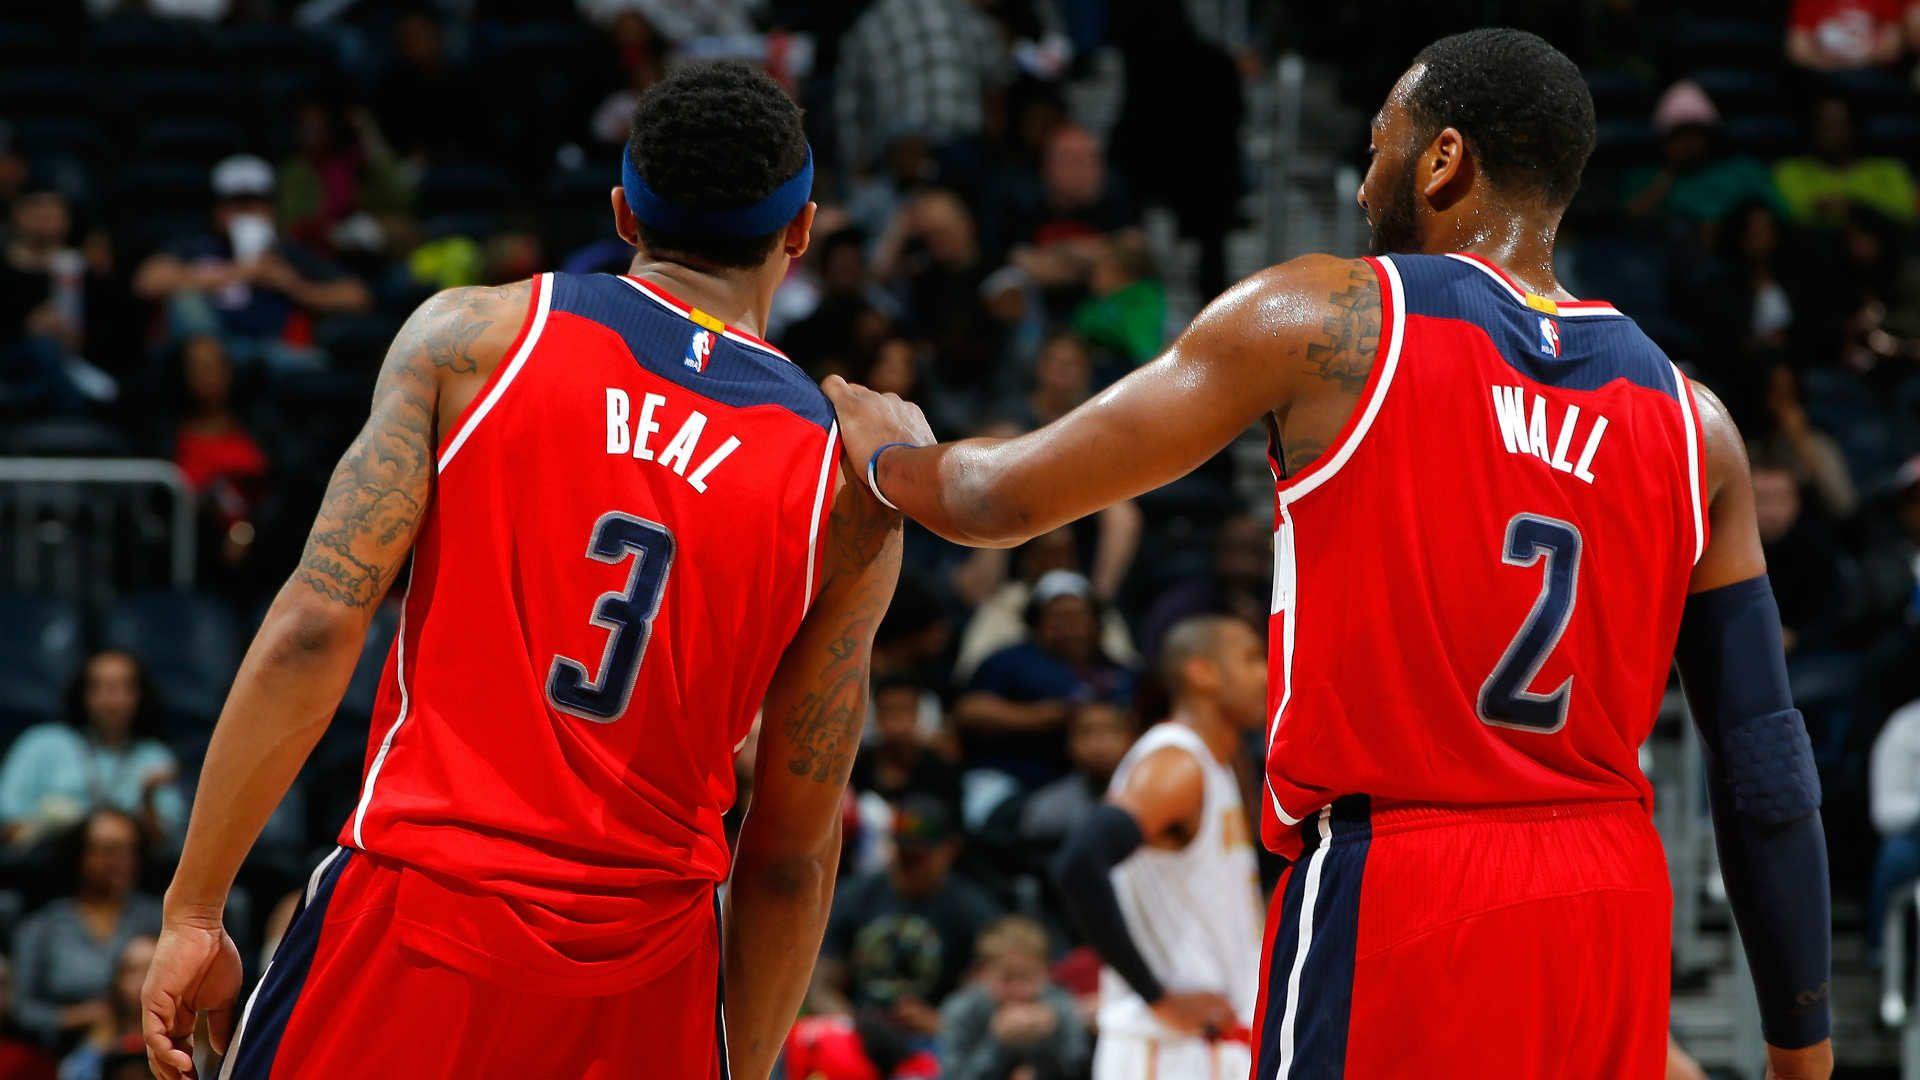 John Wall and Bradley Beal trying to overcome their mutual